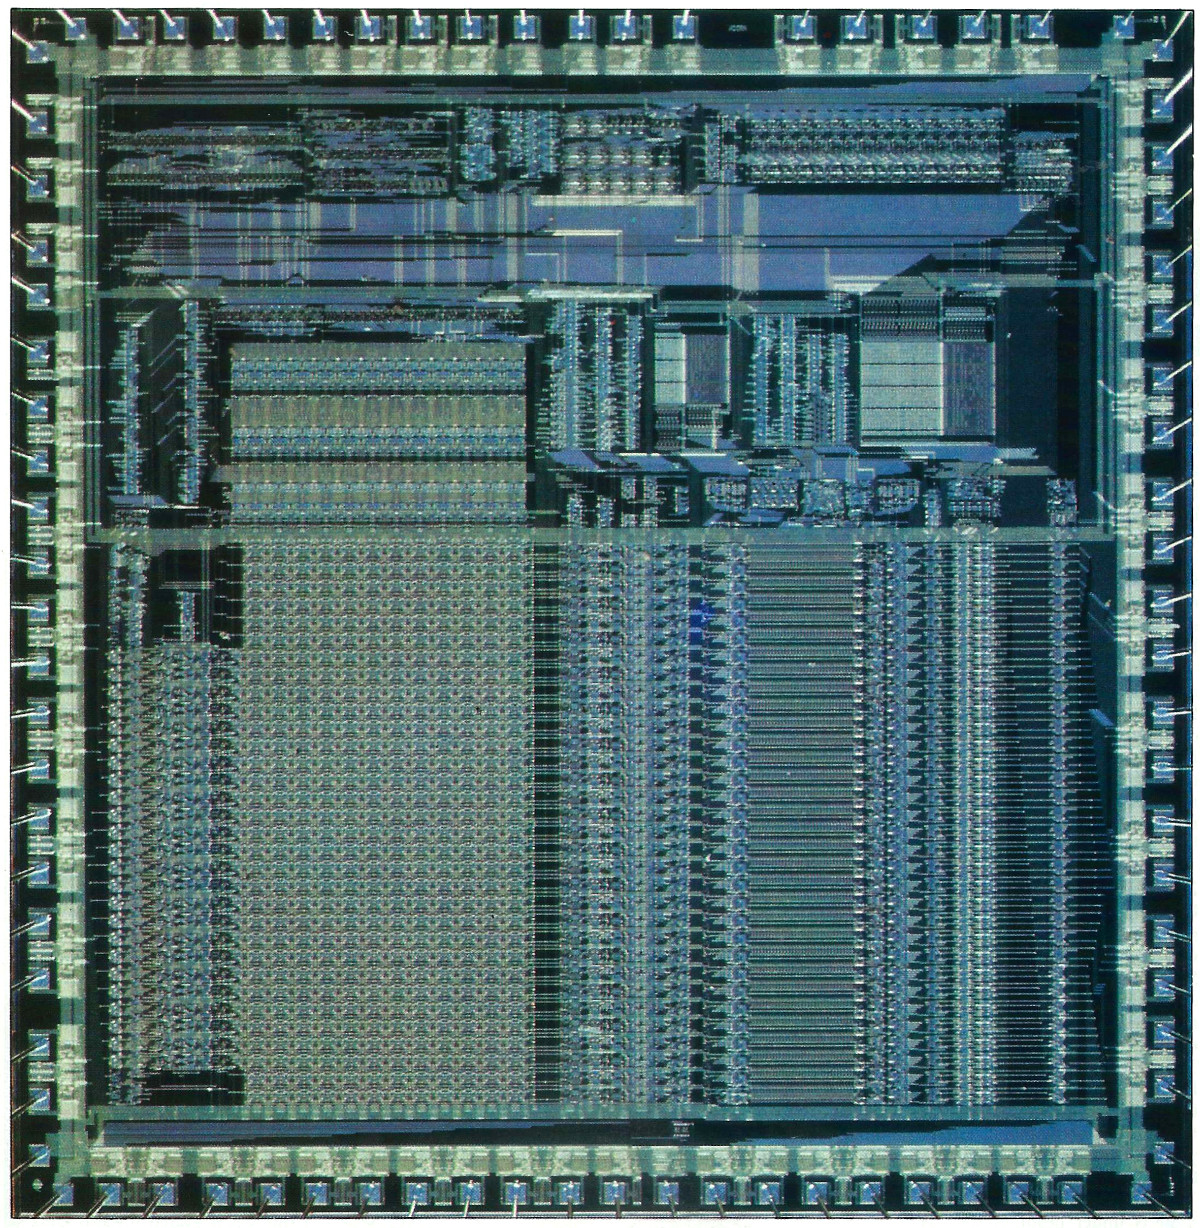 Acorn's original RISC CPU, containing 25,000 logic gates. The larger area to the bottom left is the chip's registers. The layout was optimised around this as most activity on a RISC chip is based on register transfers. F<span class='hilite'>rom</span> Practical Computing, October 1986